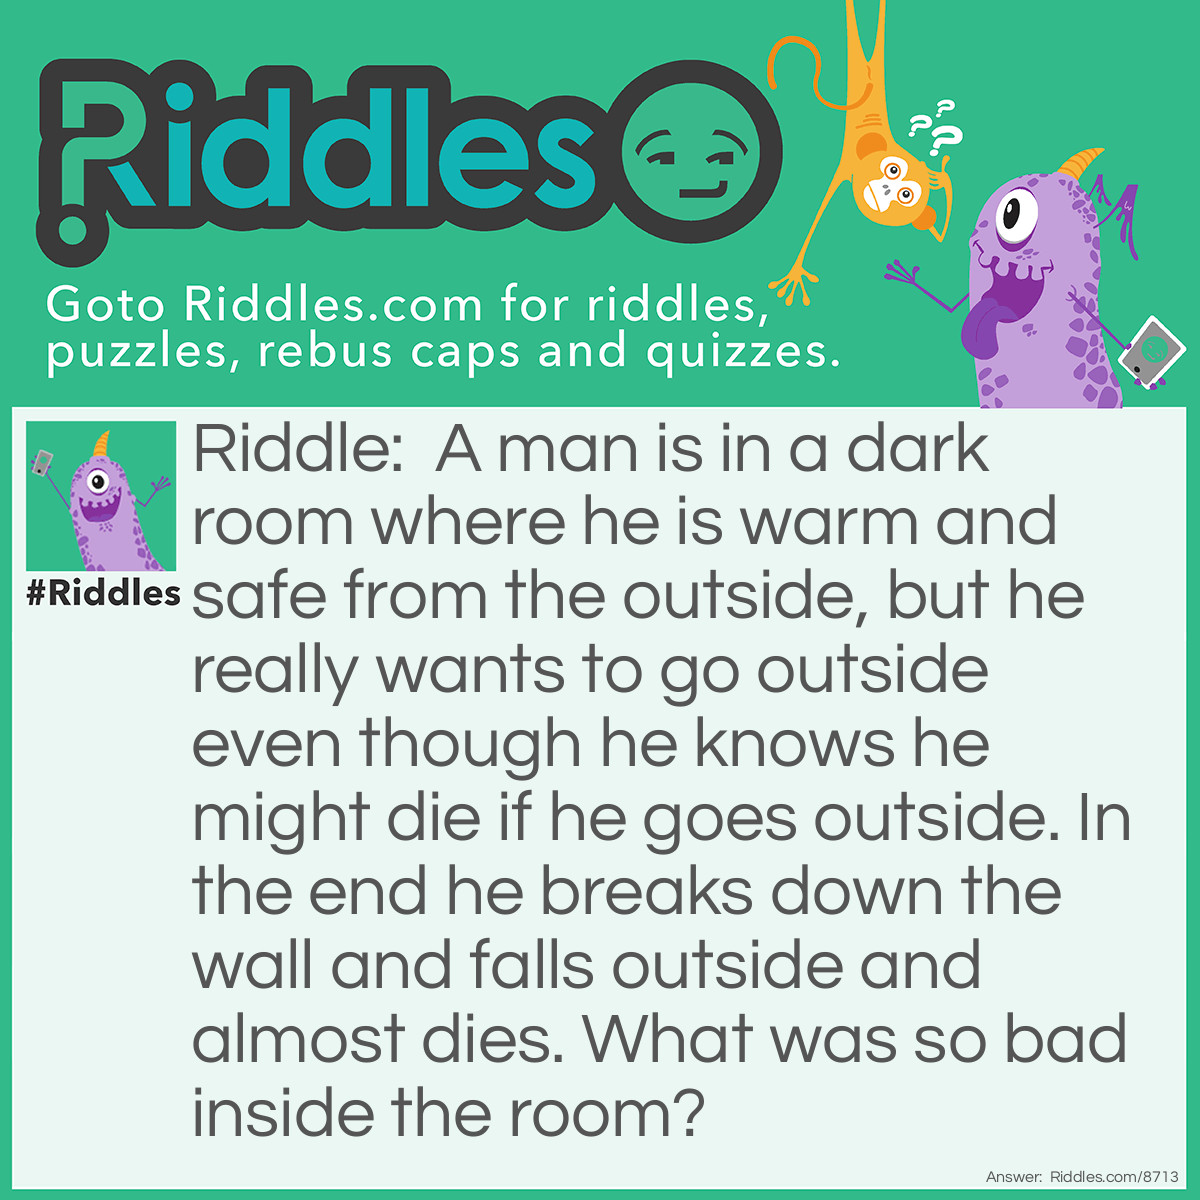 Riddle: A man is in a dark room where he is warm and safe from the outside, but he really wants to go outside even though he knows he might die if he goes outside. In the end he breaks down the wall and falls outside and almost dies. What was so bad inside the room? Answer: The dark room was a shark and the man had been eaten by the shark. The shark was filled with acid and so that was the bad thing inside the shark. It was better to go outside and maybe drown than stay in the shark and be disolved into food.